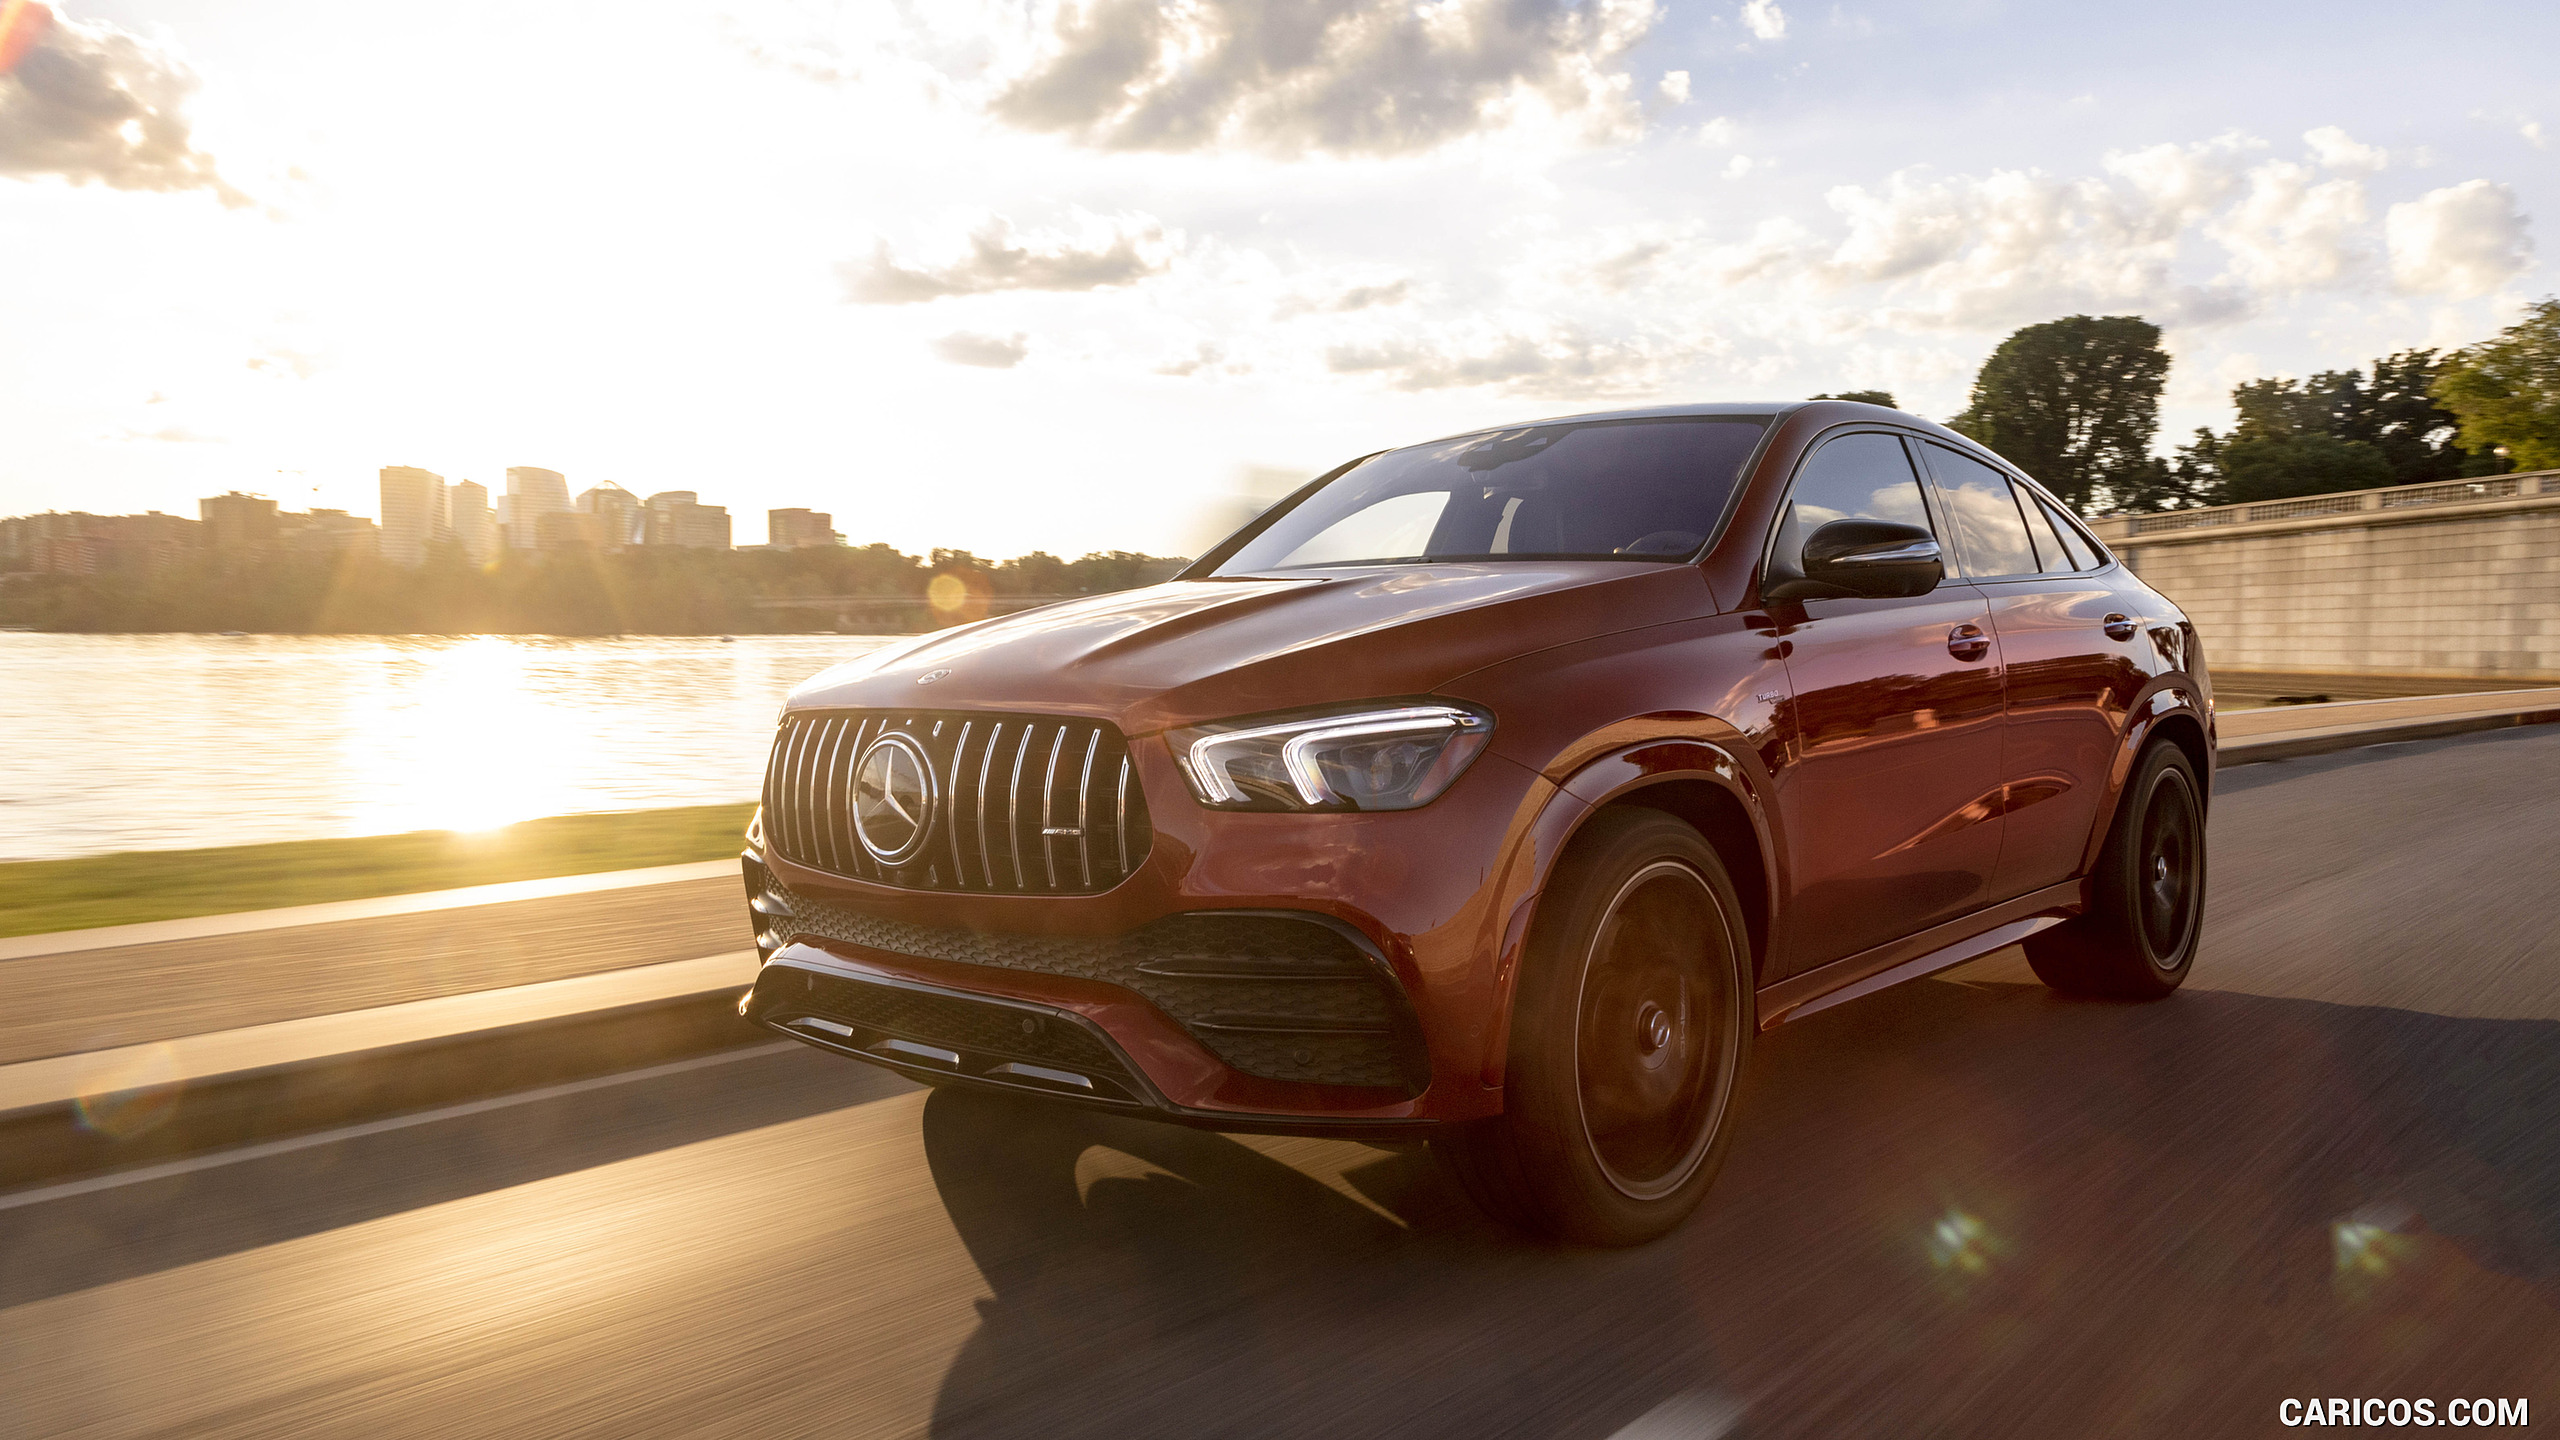 2021 Mercedes-AMG GLE 53 Coupe - Front Three-Quarter, #83 of 178